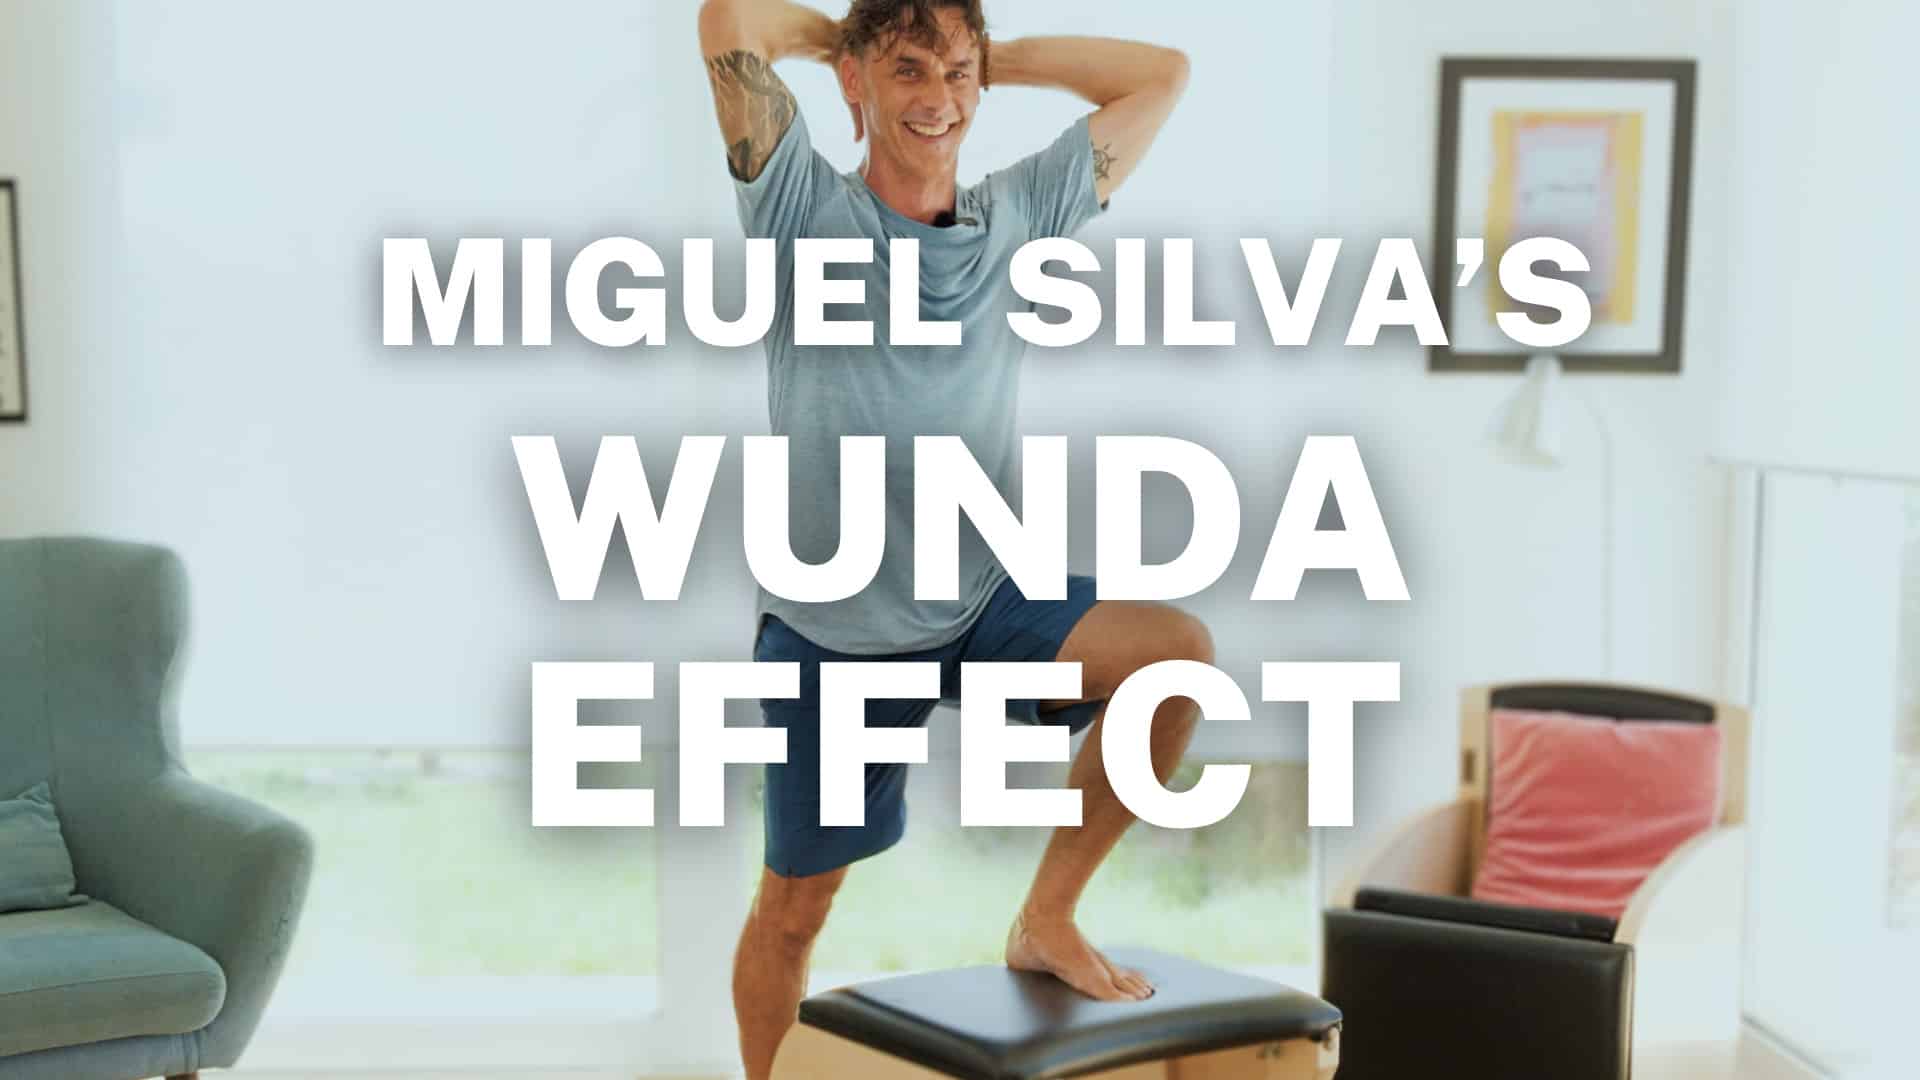 Wunda Chair Workout Series with Miguel Silva